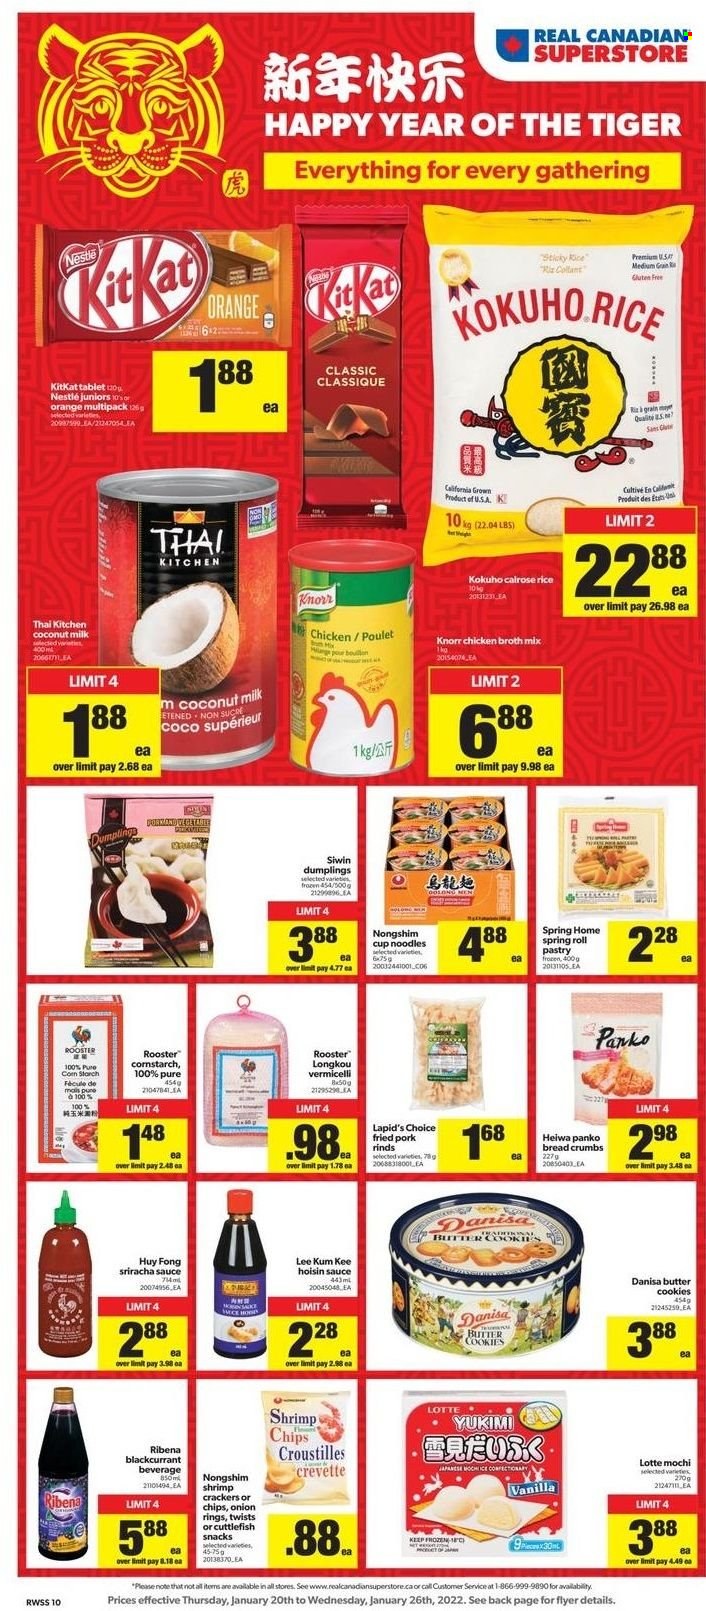 thumbnail - Real Canadian Superstore Flyer - January 20, 2022 - January 26, 2022 - Sales products - tablet, breadcrumbs, panko breadcrumbs, cuttlefish, shrimps, onion rings, sauce, dumplings, cookies, butter cookies, snack, KitKat, crackers, cornstarch, starch, chicken broth, broth, coconut milk, rice, sriracha, hoisin sauce, Lee Kum Kee, cup, Knorr, Nestlé, oranges. Page 10.